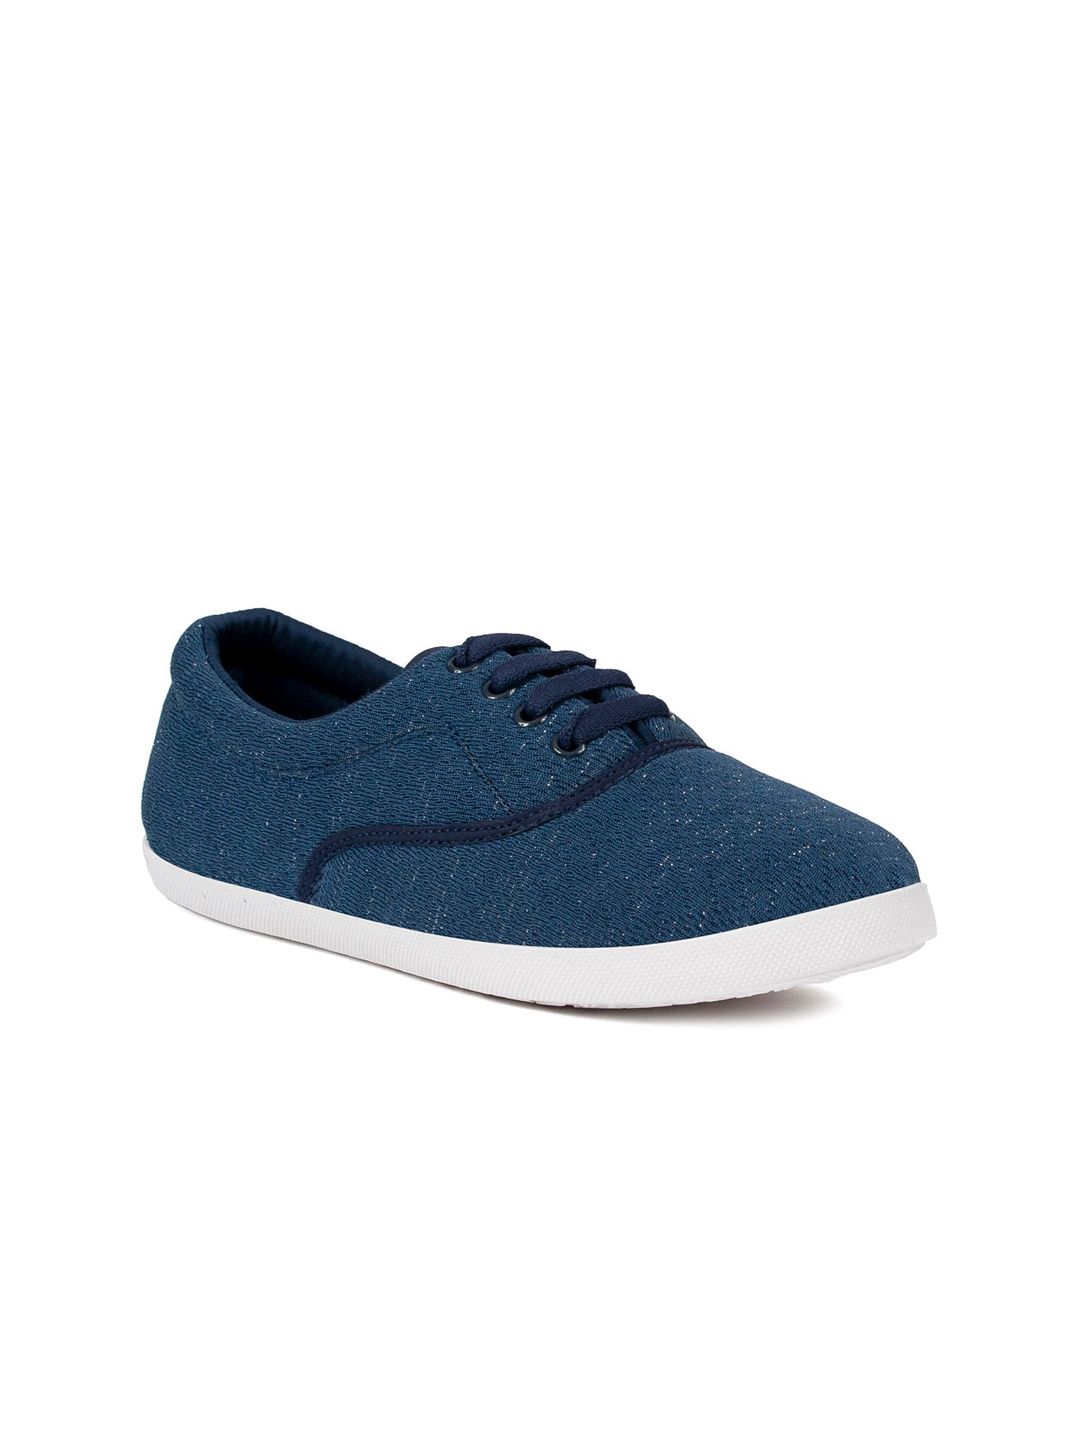 ASIAN Women Navy Blue Textured Sneakers Price in India